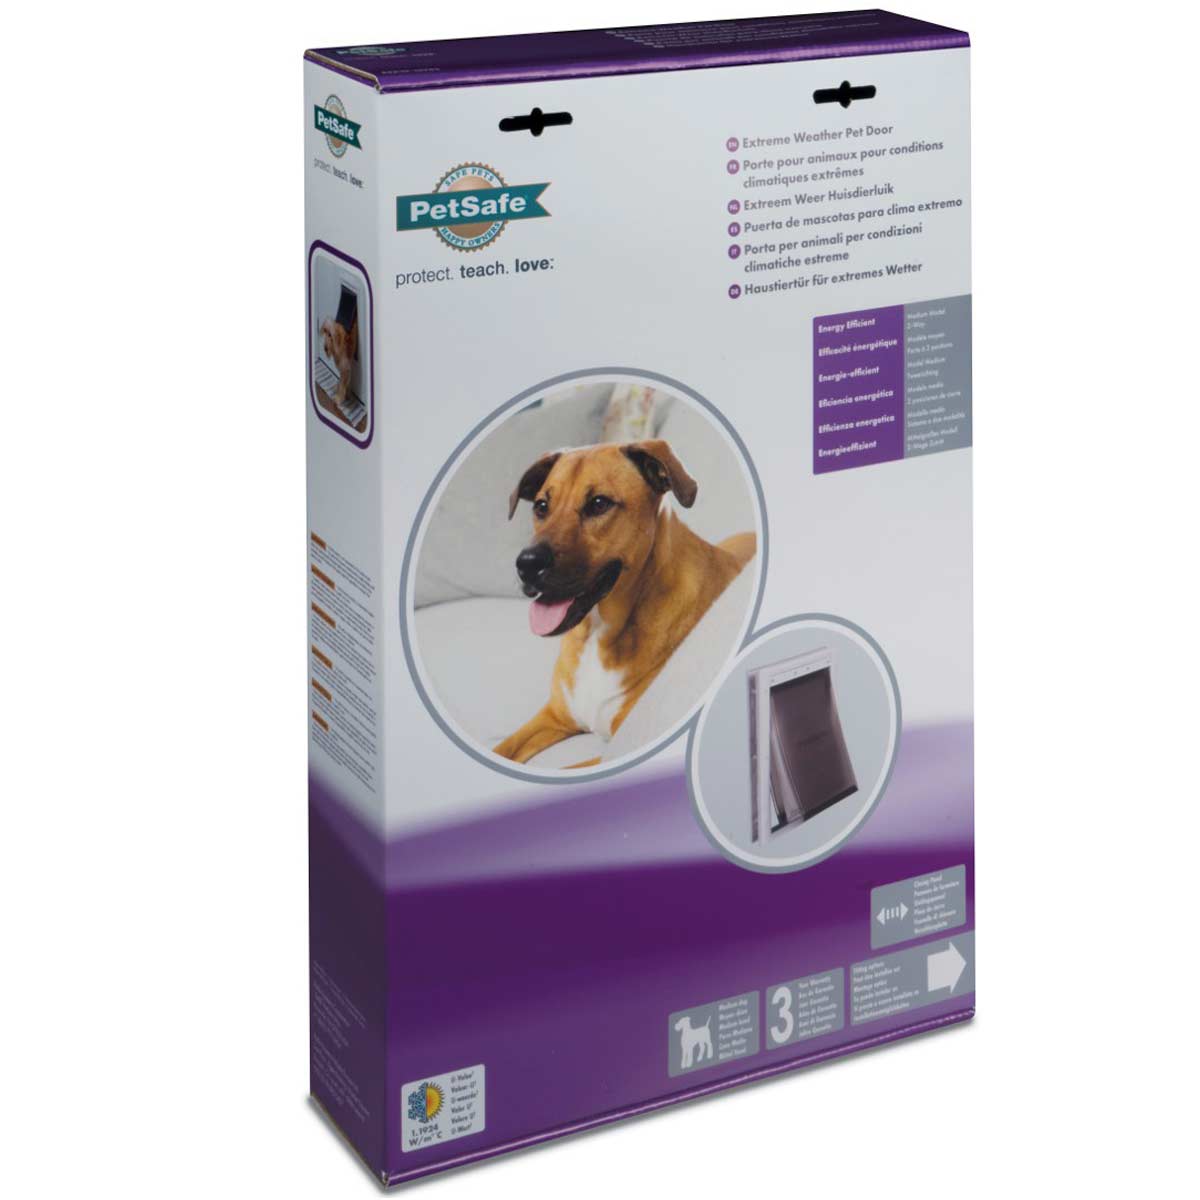 PetSafe pet flap for extreme weather small